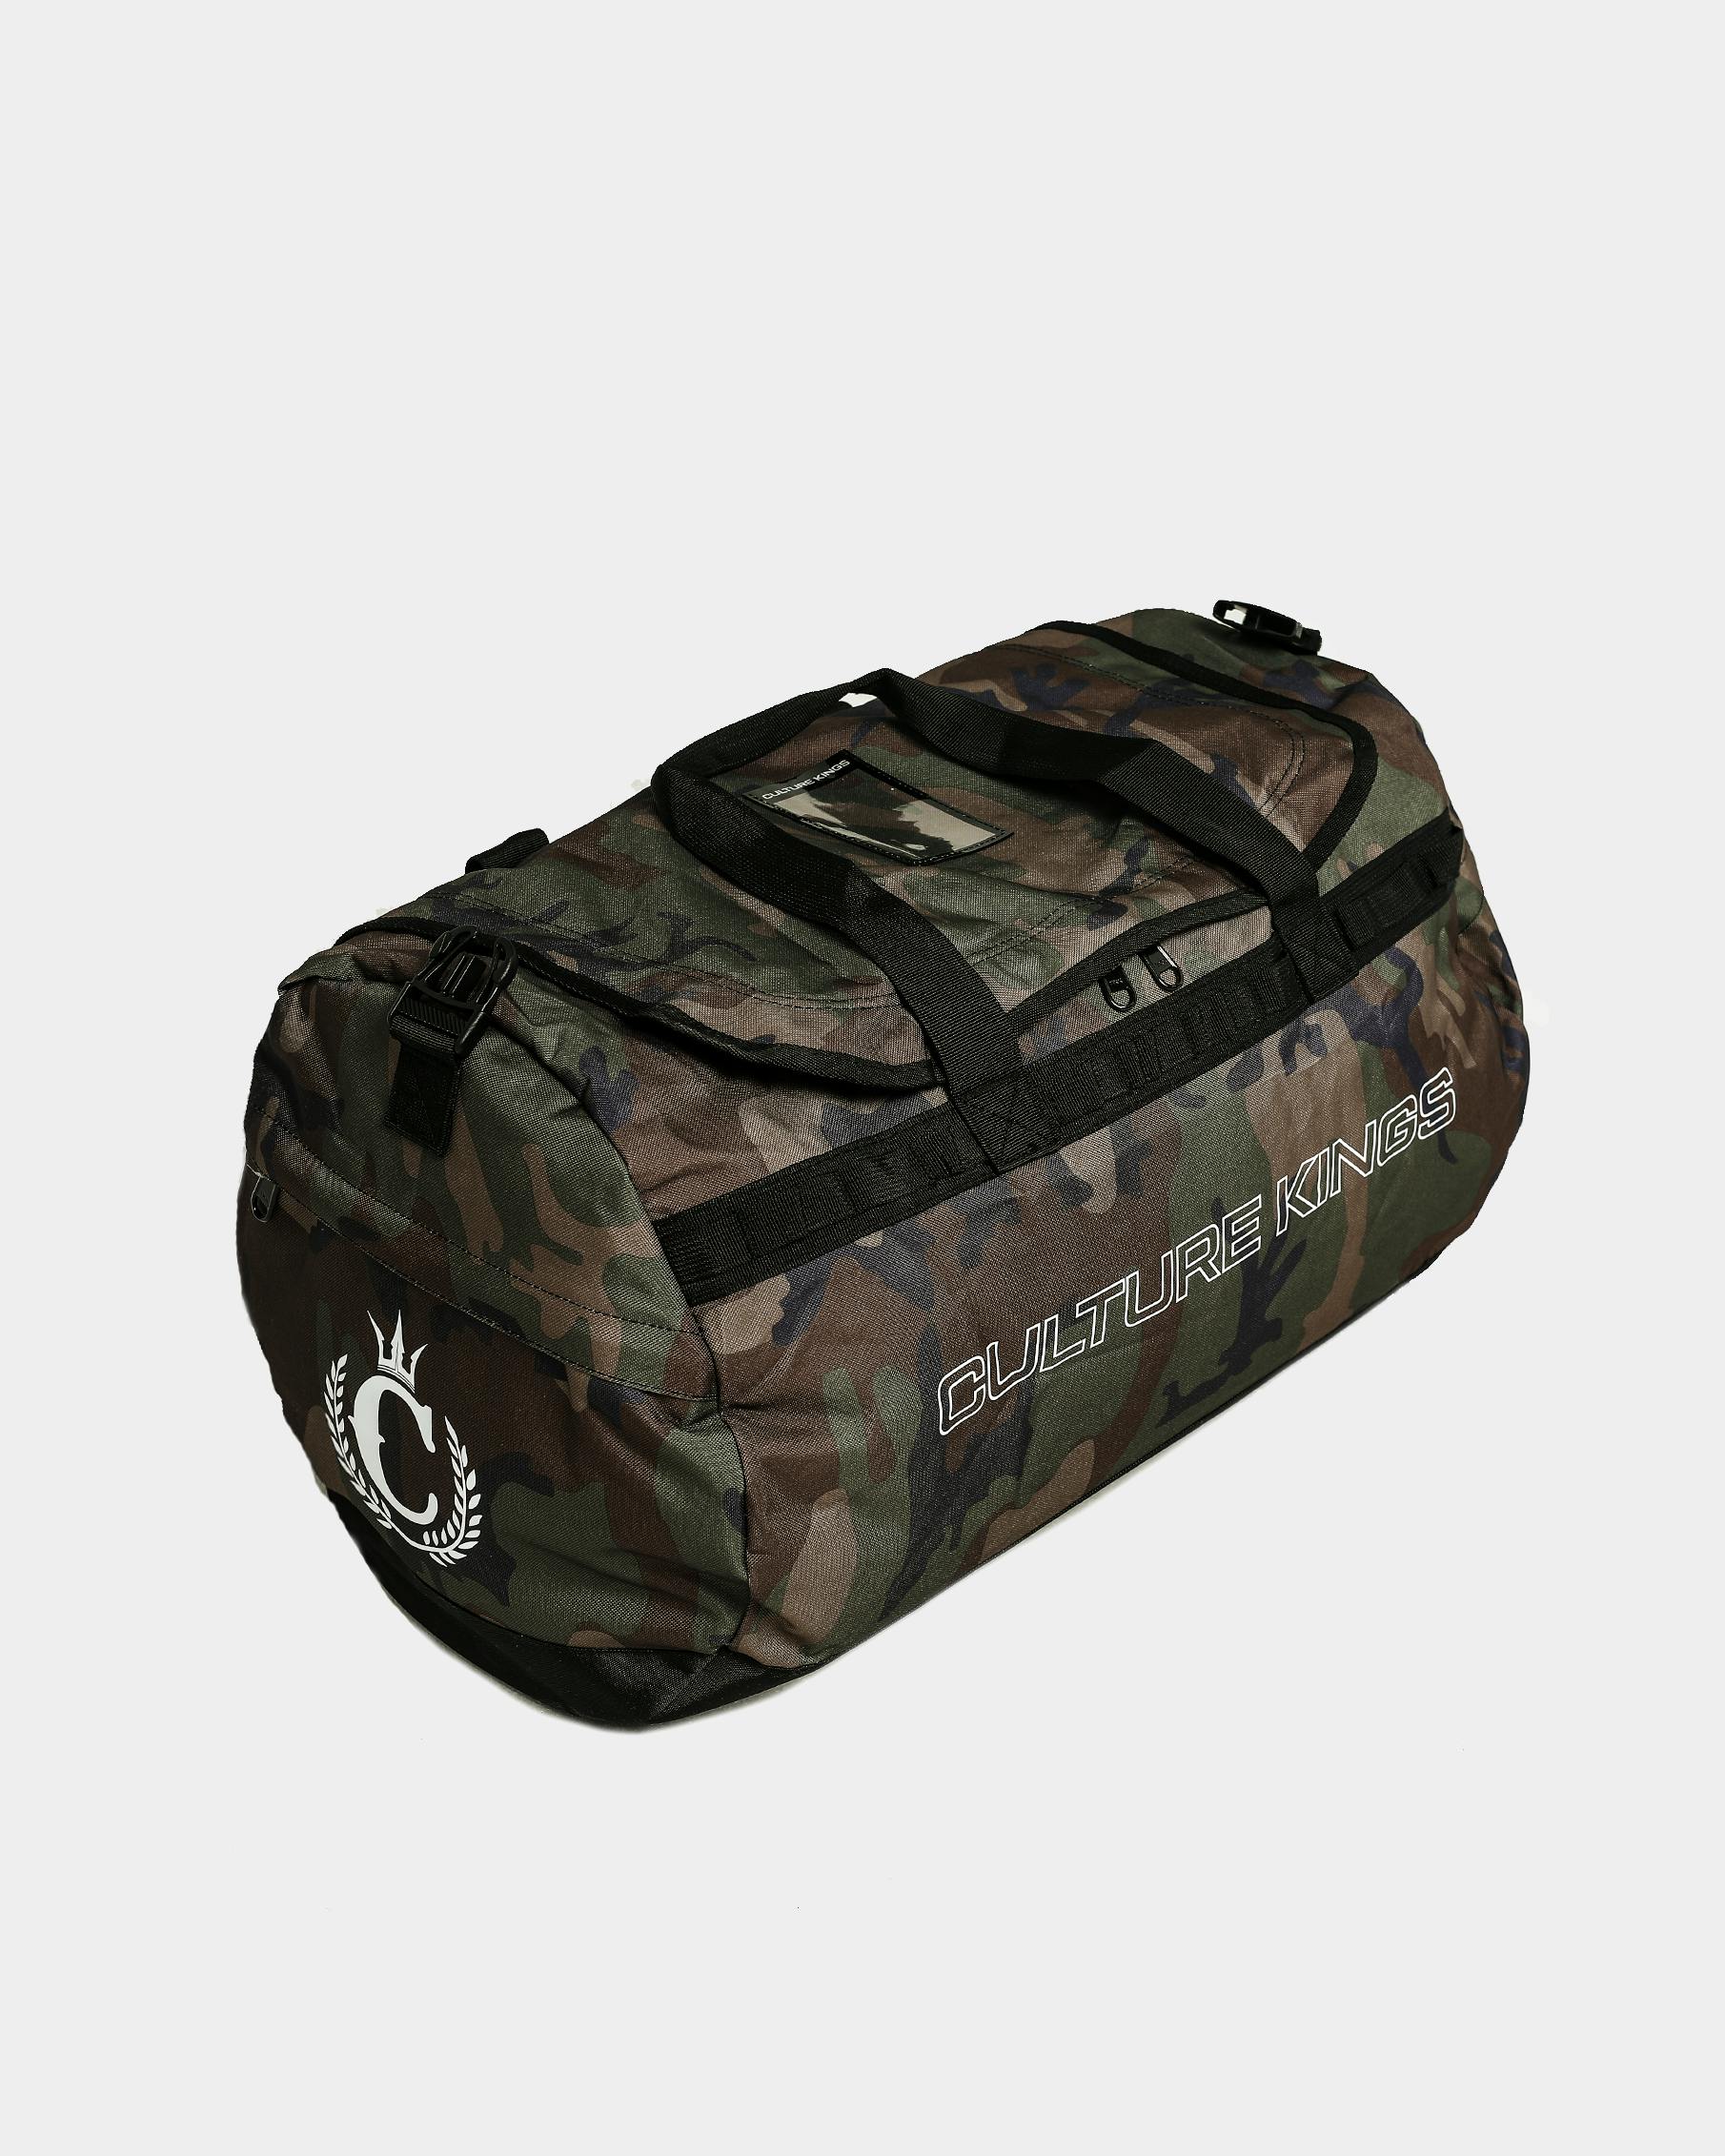 CULTURE KINGS NOT-FOR-SALE MULTI FUNCTION DUFFLE BAG CAMO | Culture Kings NZ